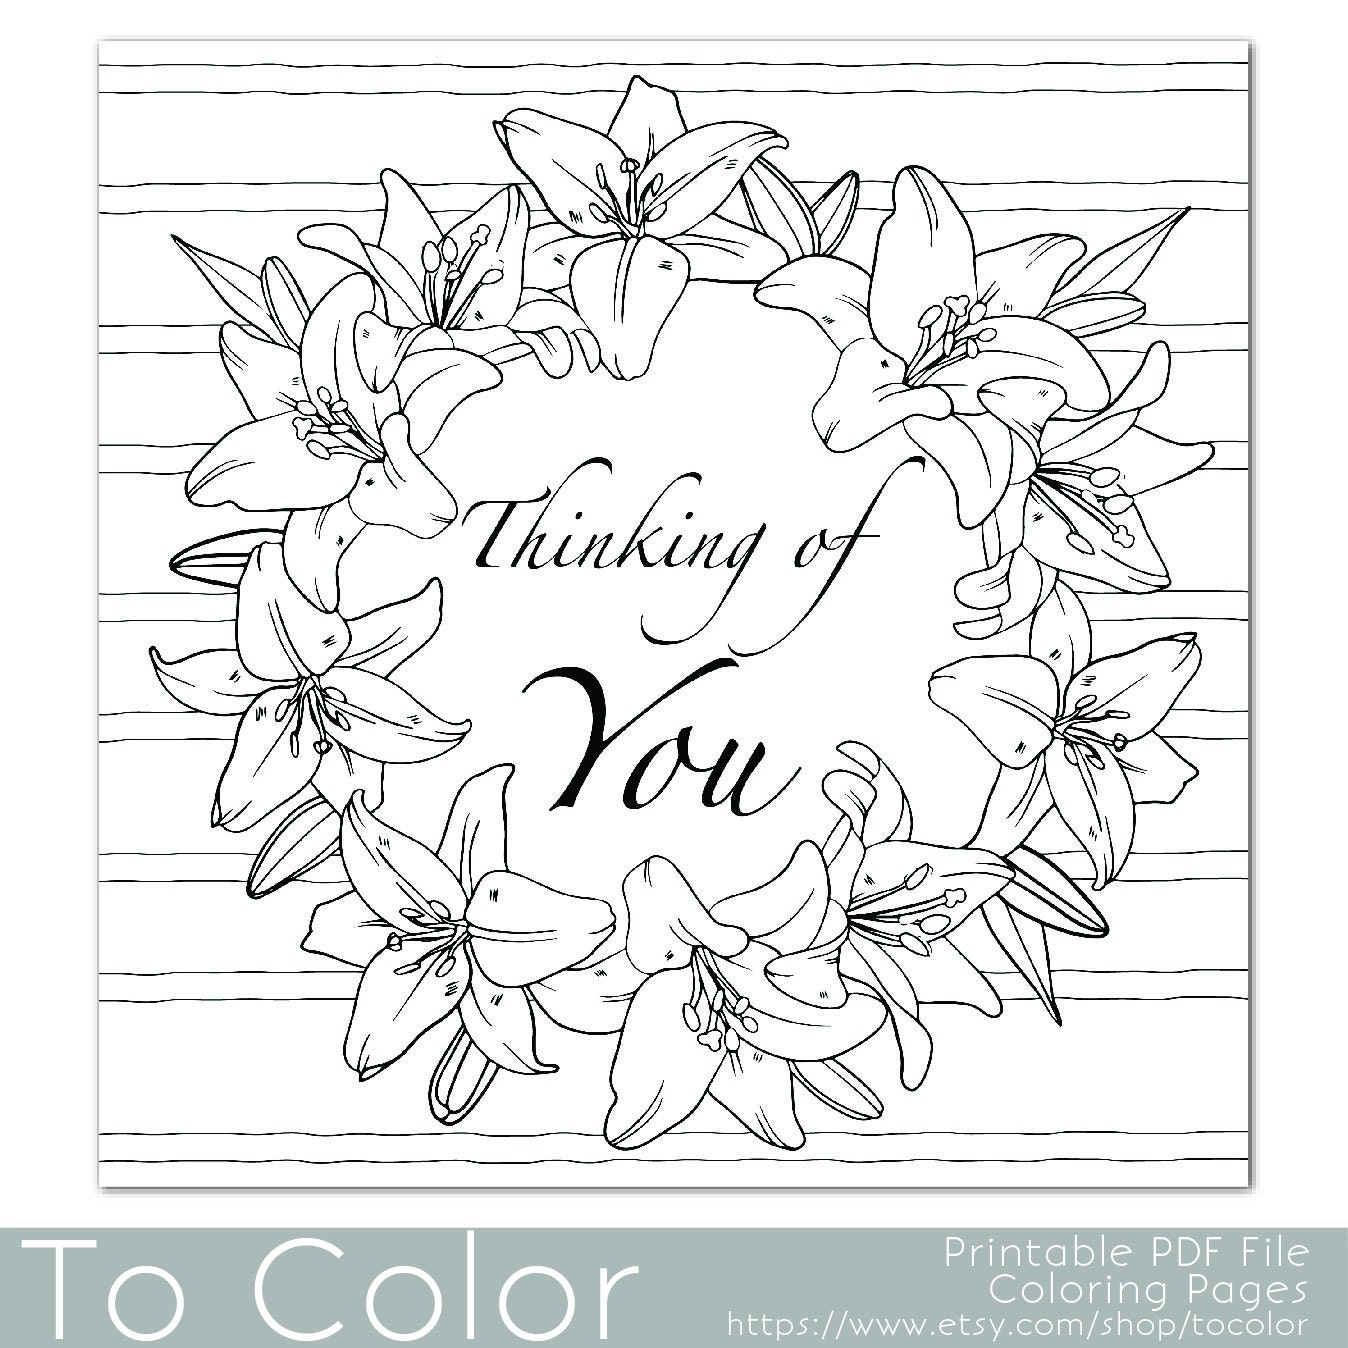 Lilies Frame Thinking Of You Coloring Page for Adults PDF